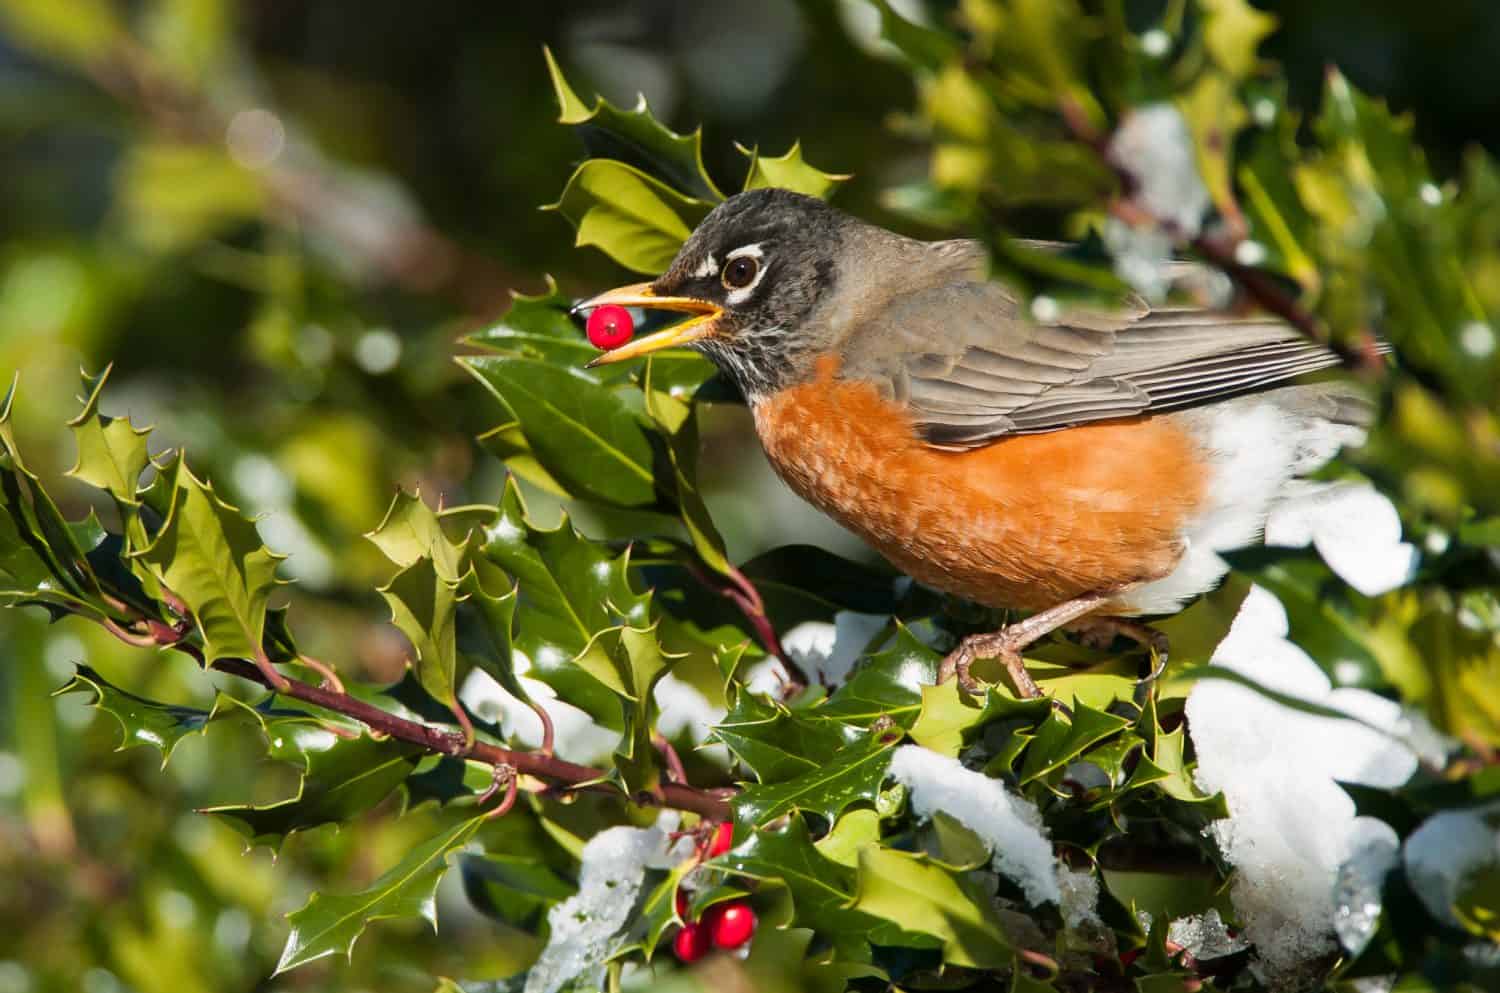  male American Robin Turdus migratorius eating berry in winter holly in Union Bay, British Columbia Canada